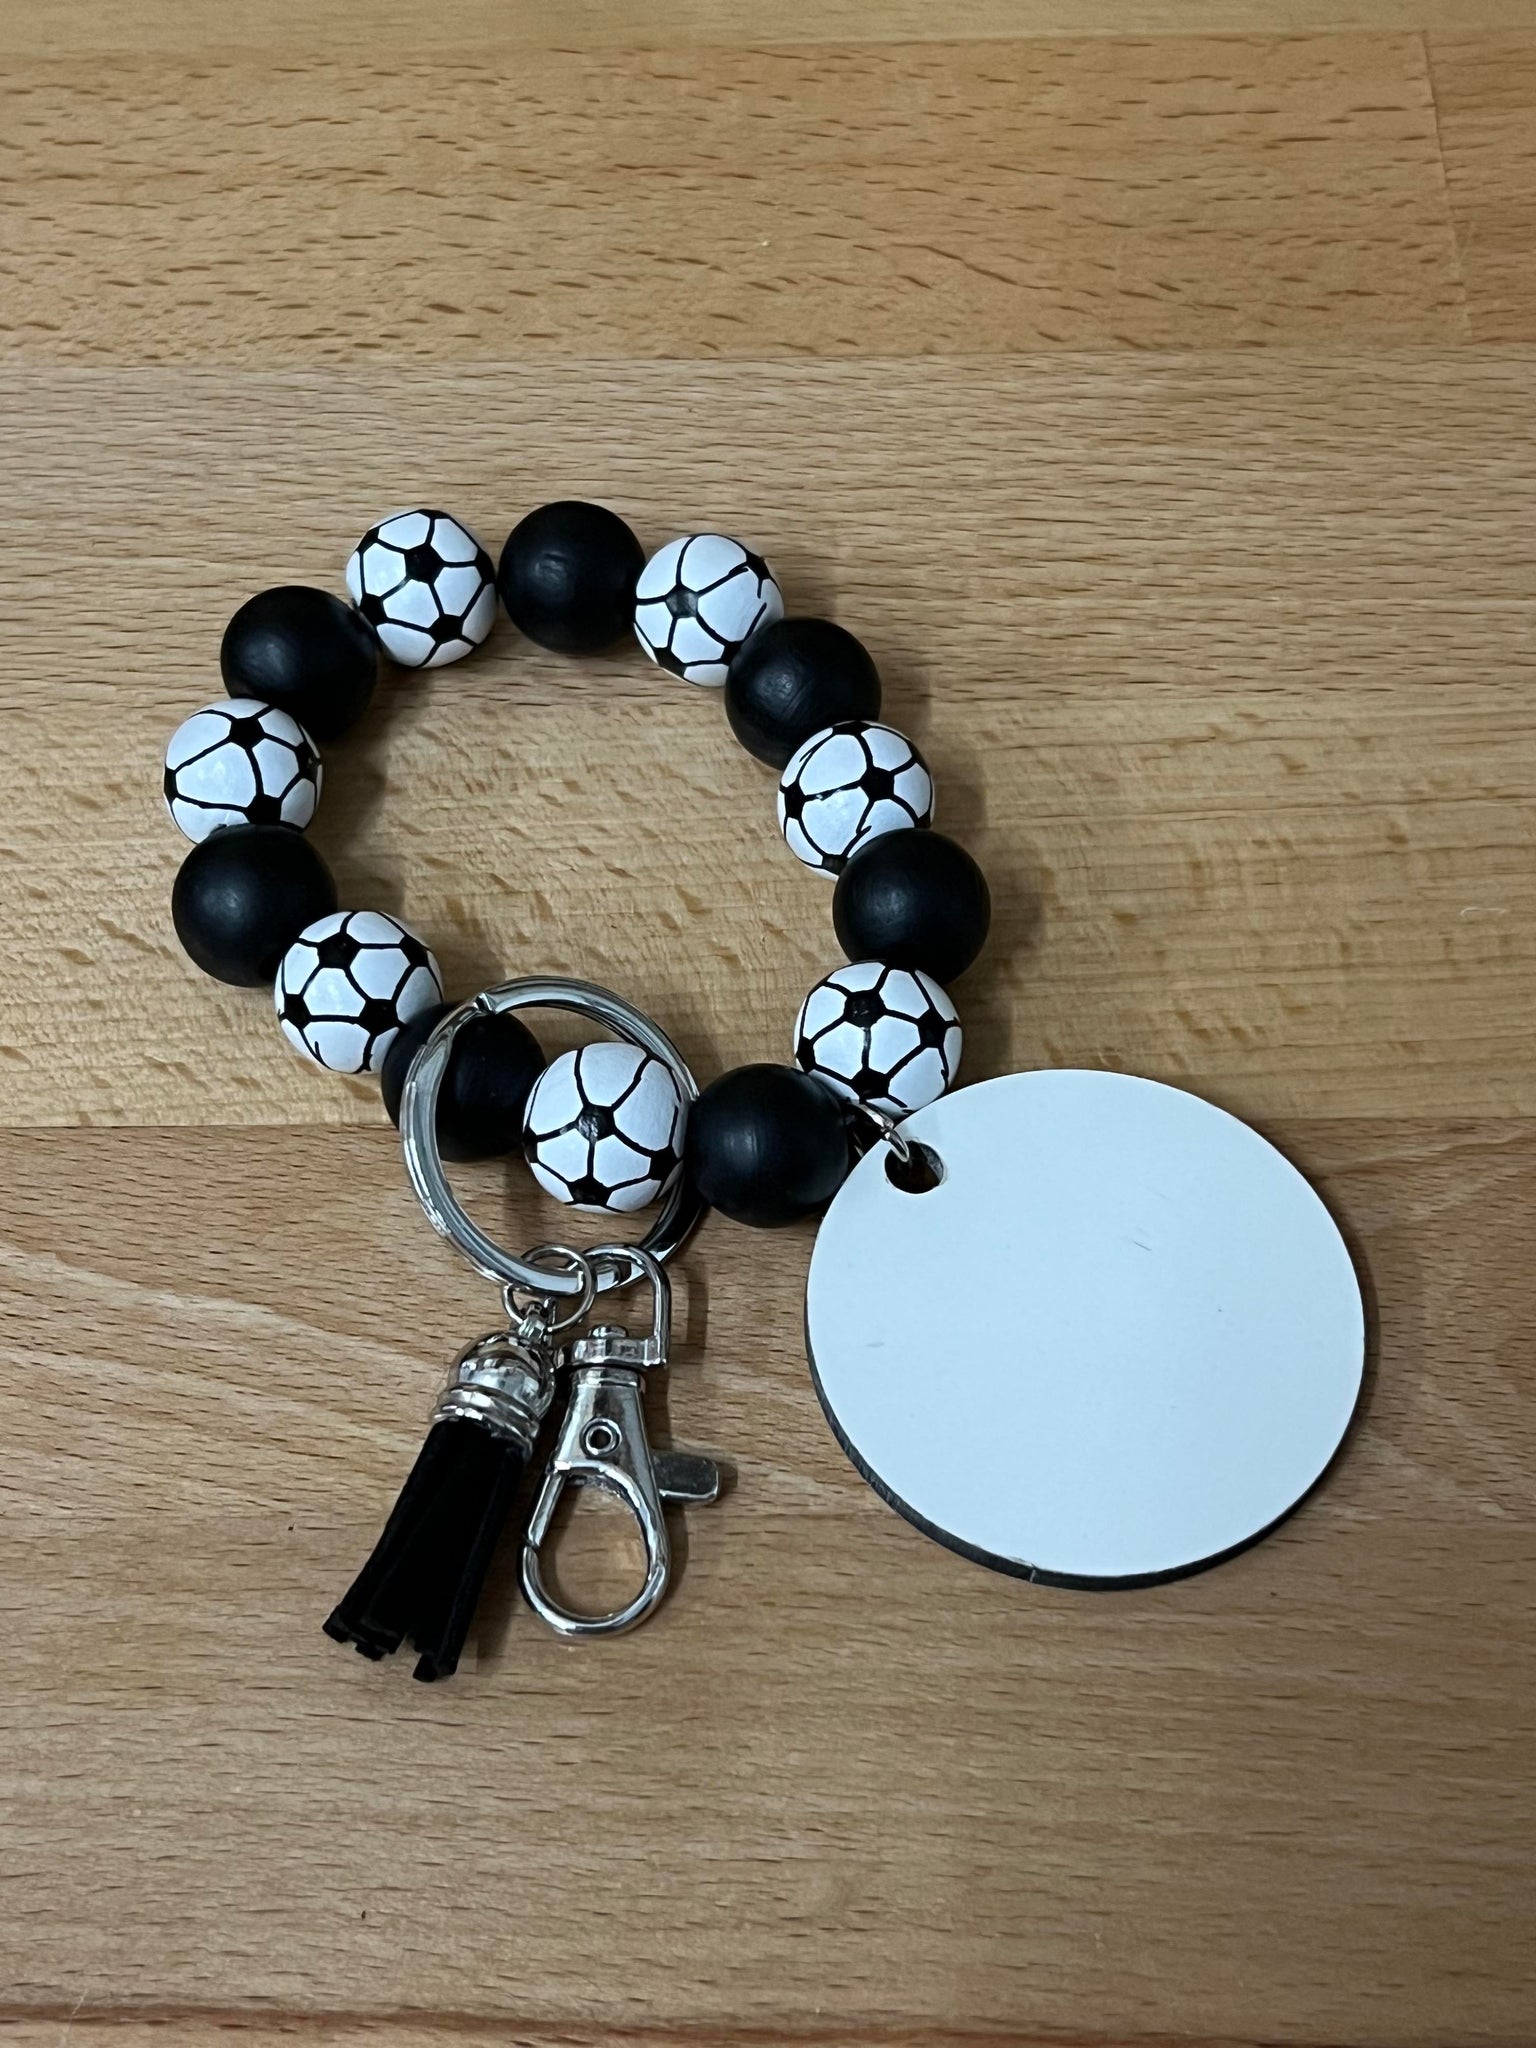 Sports bracelet - Soccer with a 2-inch double sided mdf round